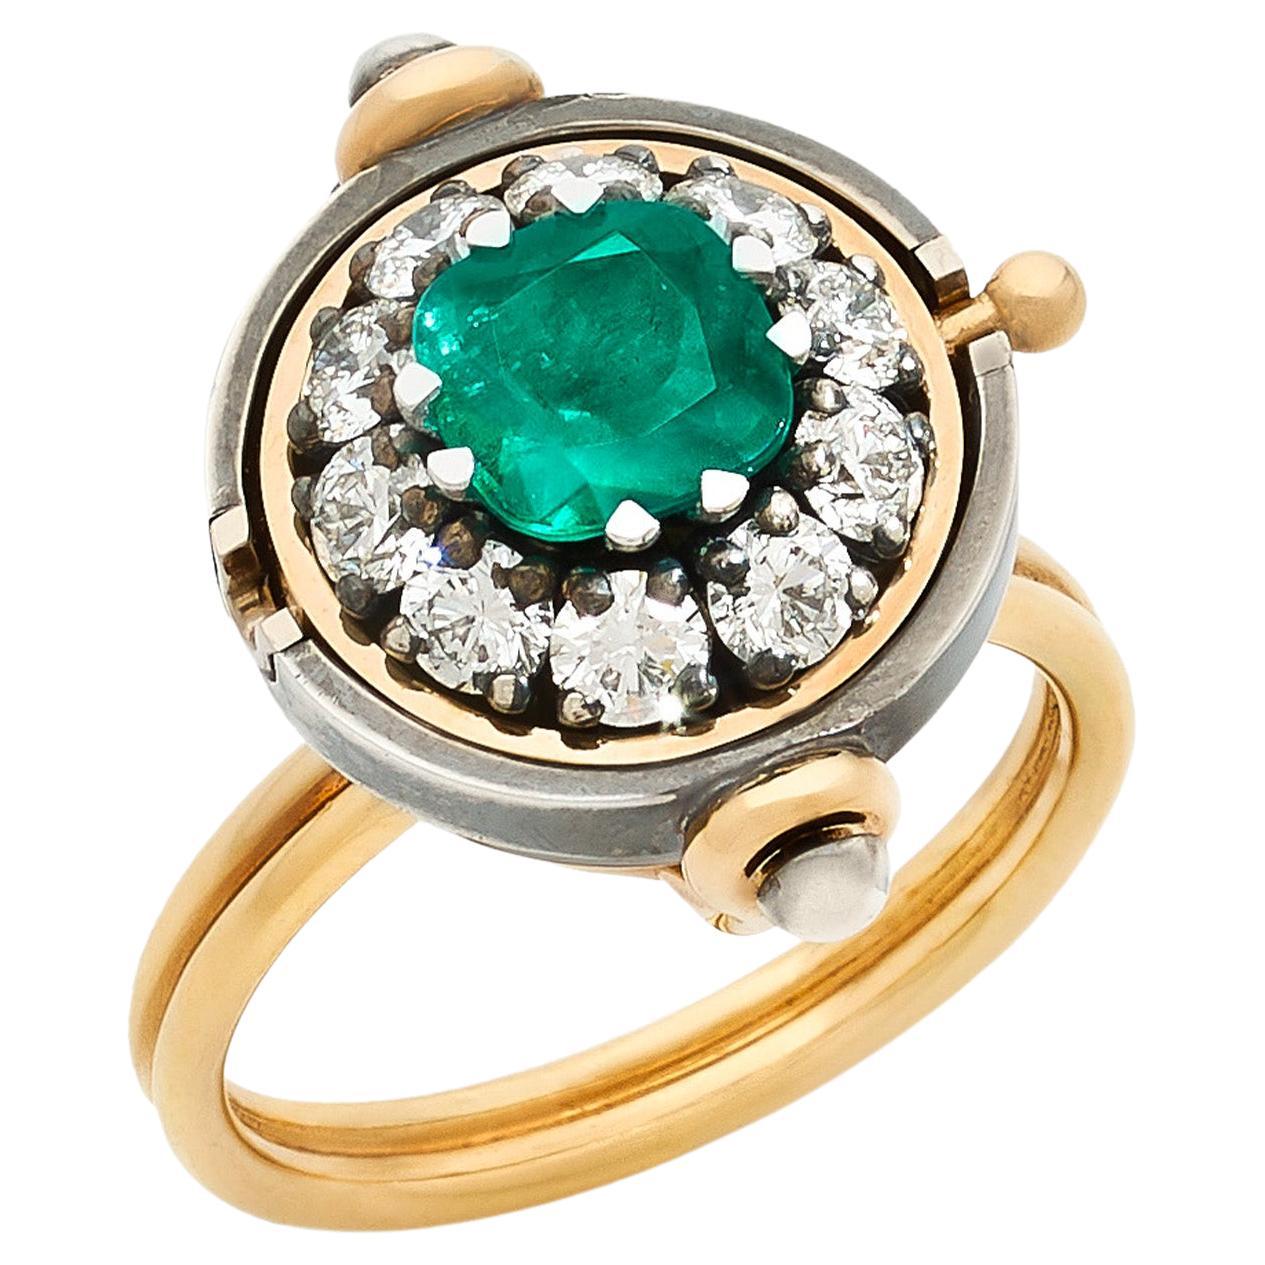 Medium Emerald & Diamonds Sphere Ring in 18k Yellow Gold by Elie Top